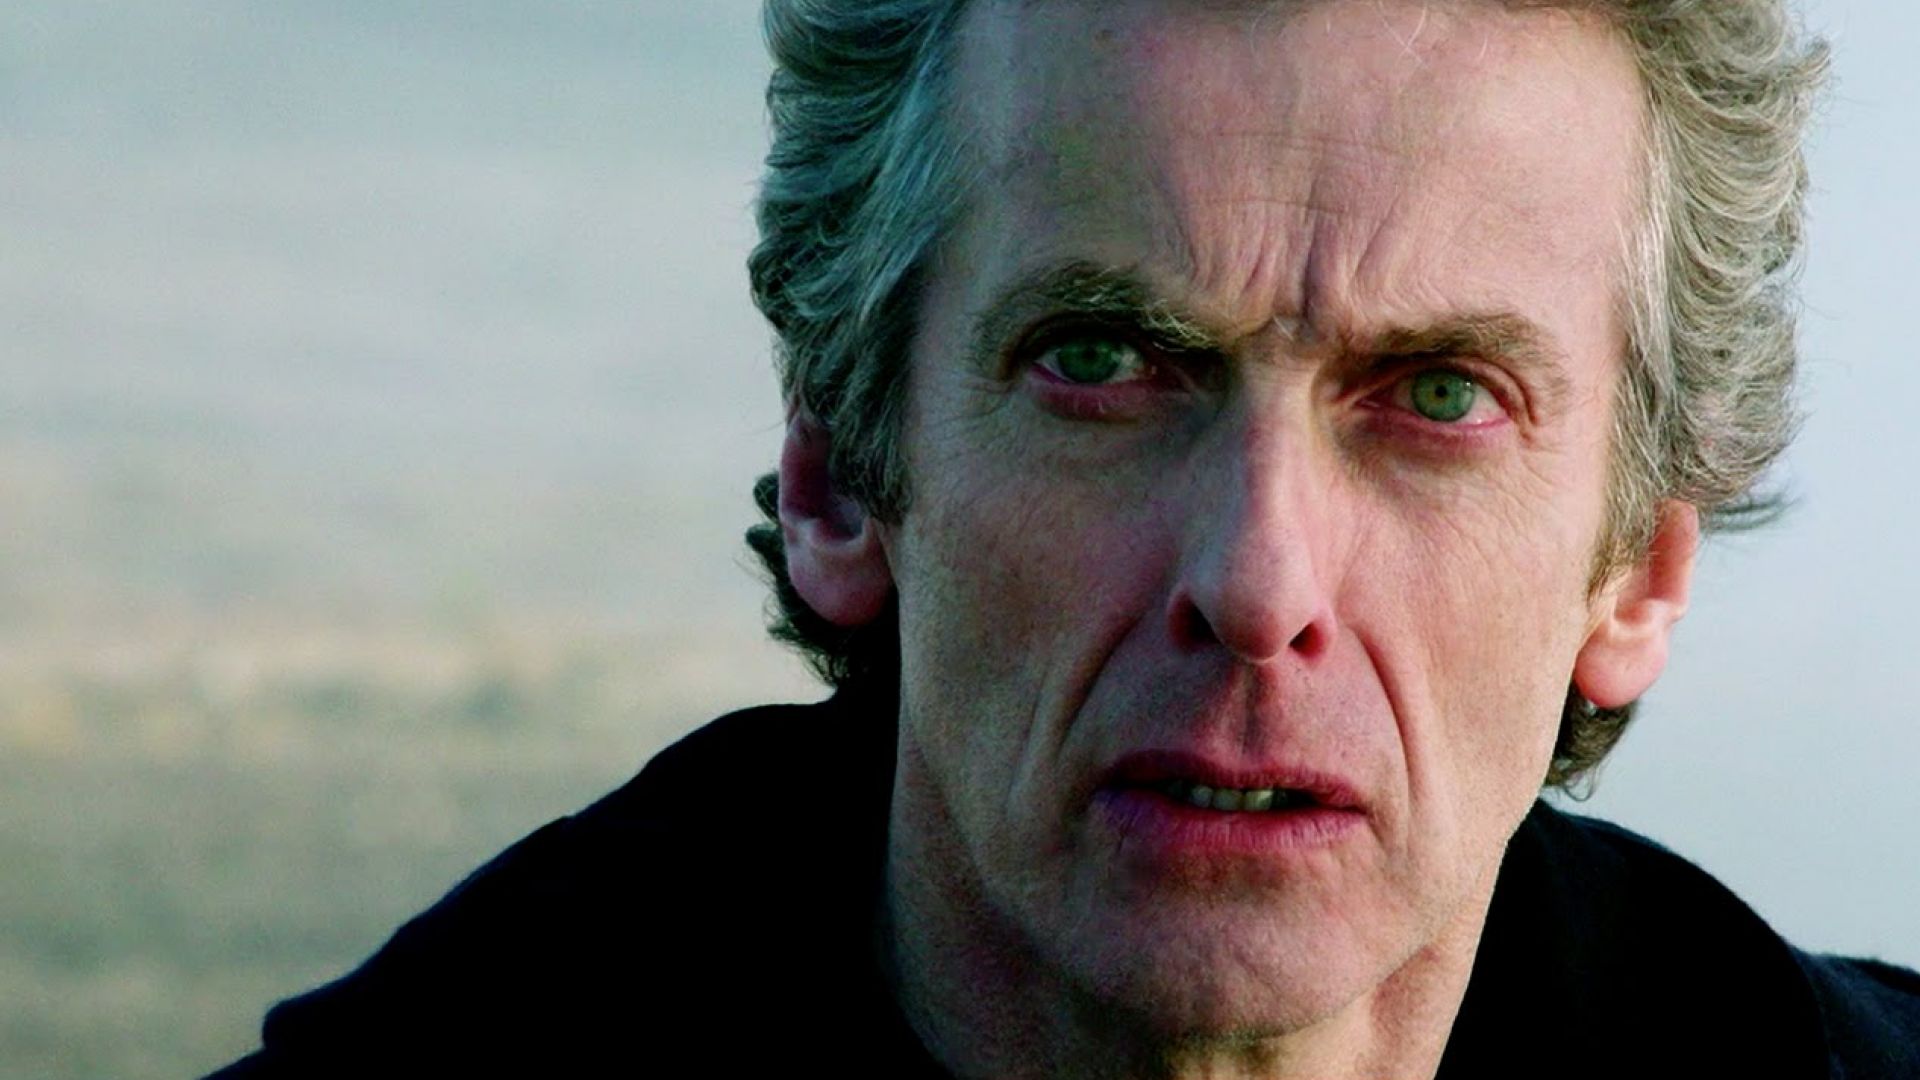 Cinematic trailer for &#039;Doctor Who&#039; Season 9 lands. Coming Se